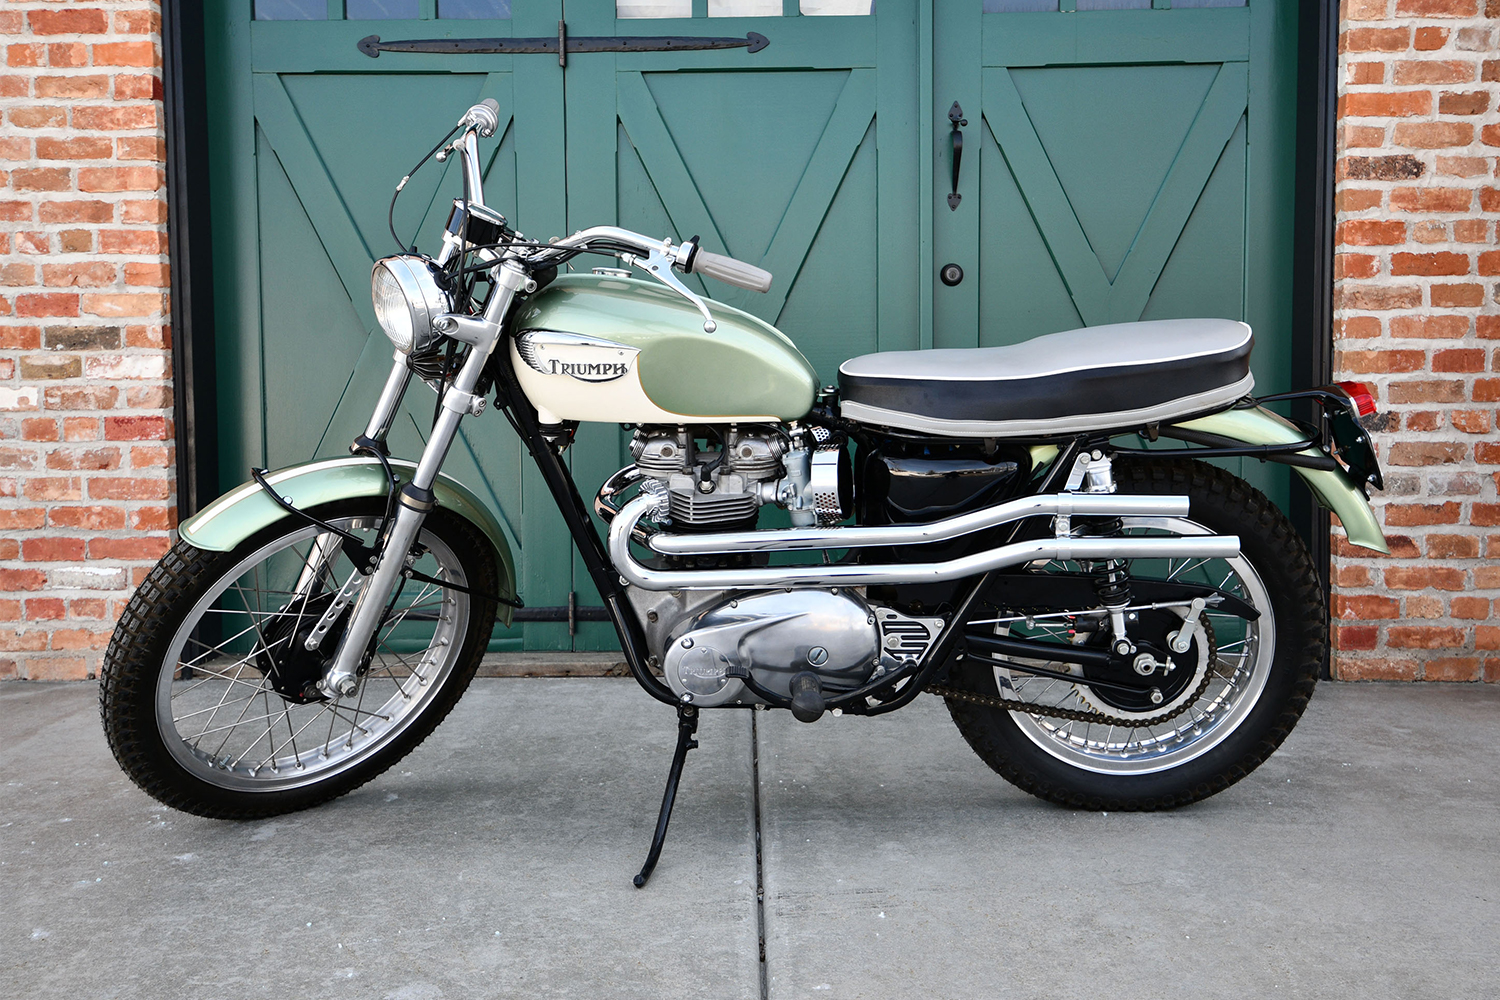 A 1970 Triumph Bonneville TR120 owned by Steve McQueen's Solar Productions. The motorcycle is headed to RM Sotheby's Monterey auction.